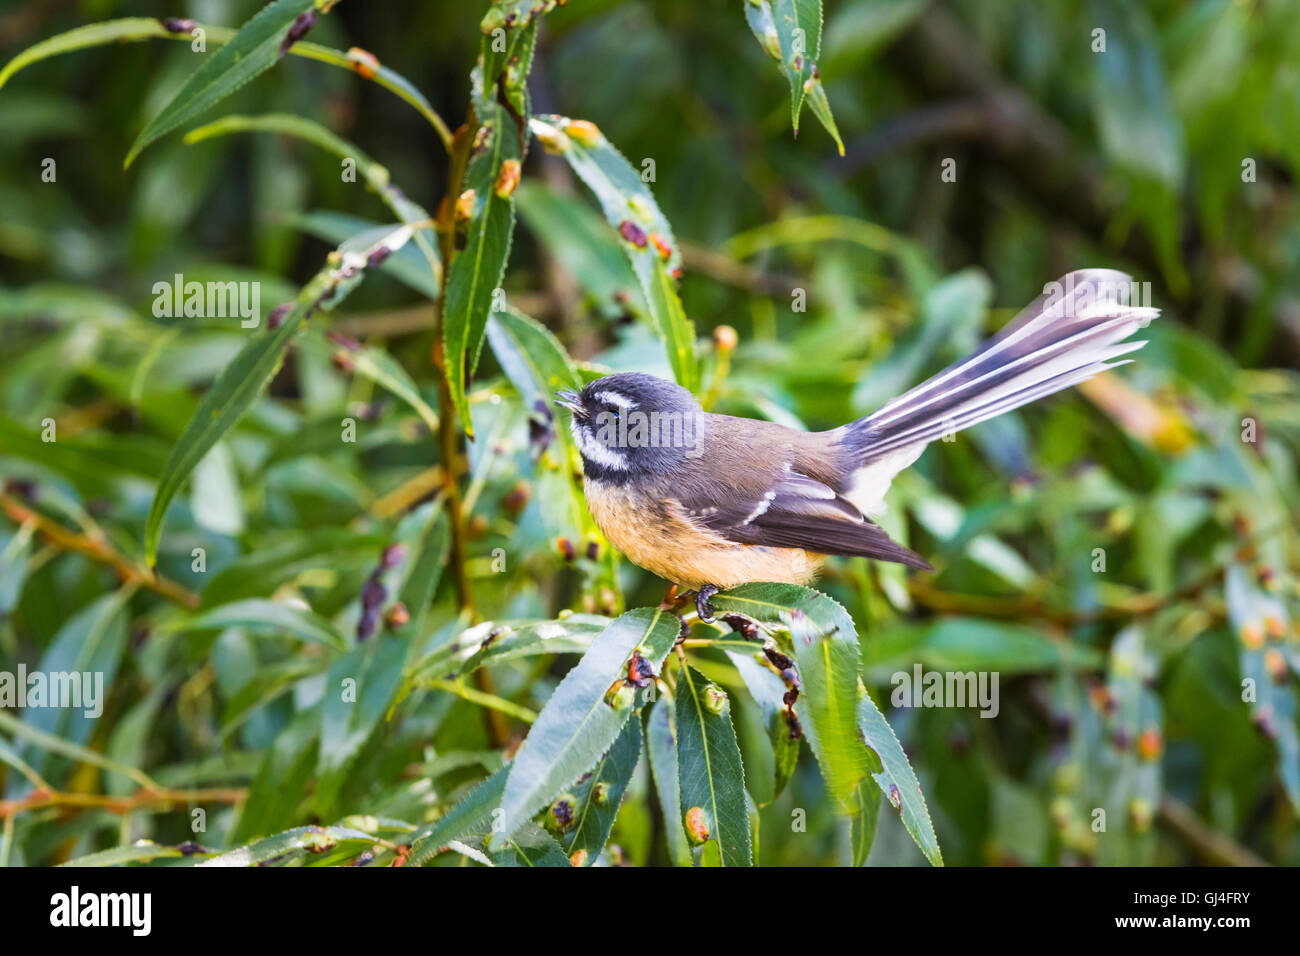 New Zealand fantail (Rhipidura fuliginosa), small insectivorous bird, that will approach people to take advantage of the insects Stock Photo